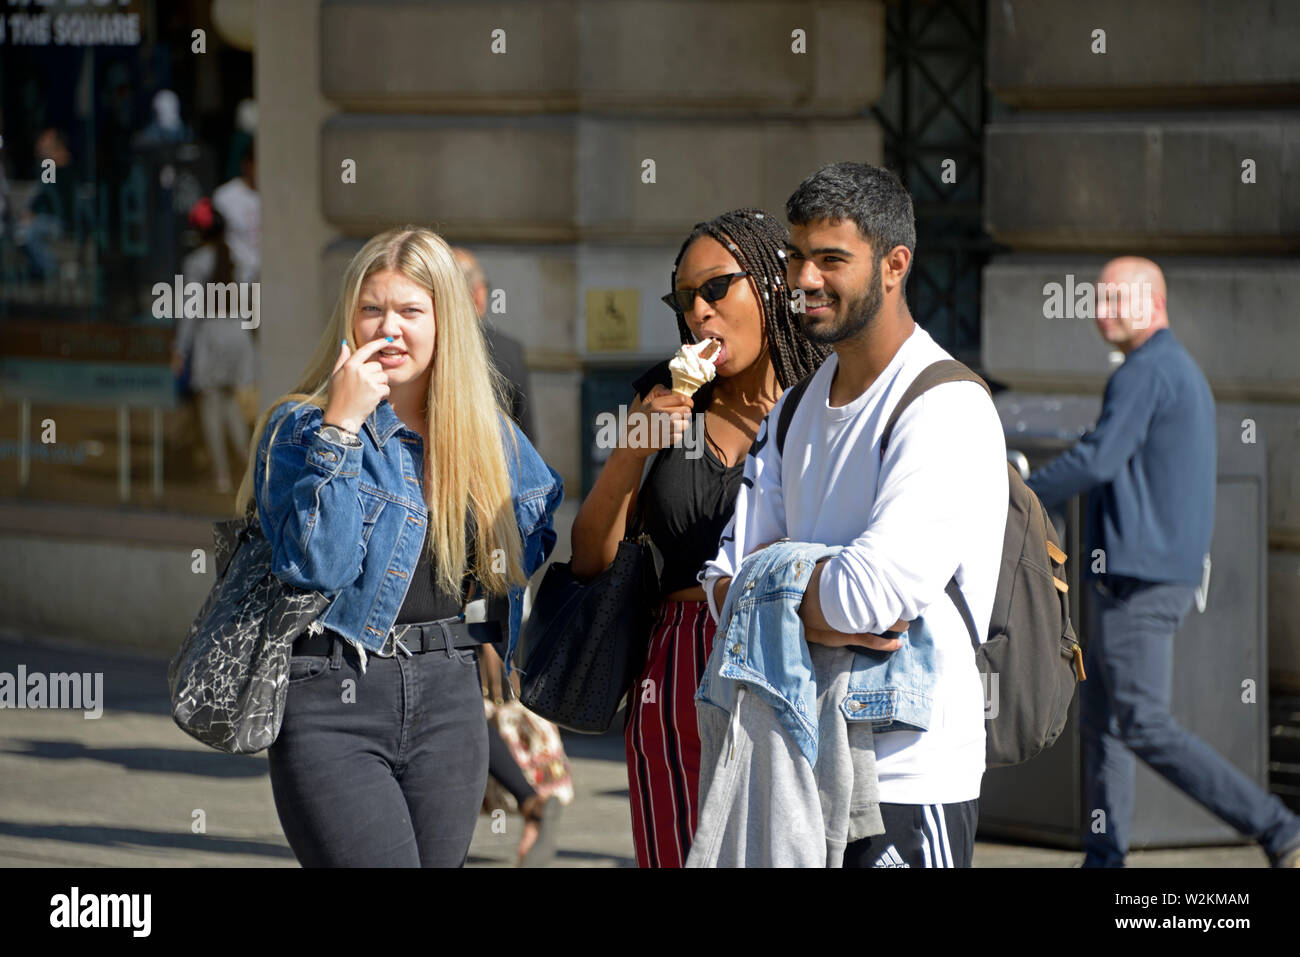 Mixed racial group, in the street. Stock Photo